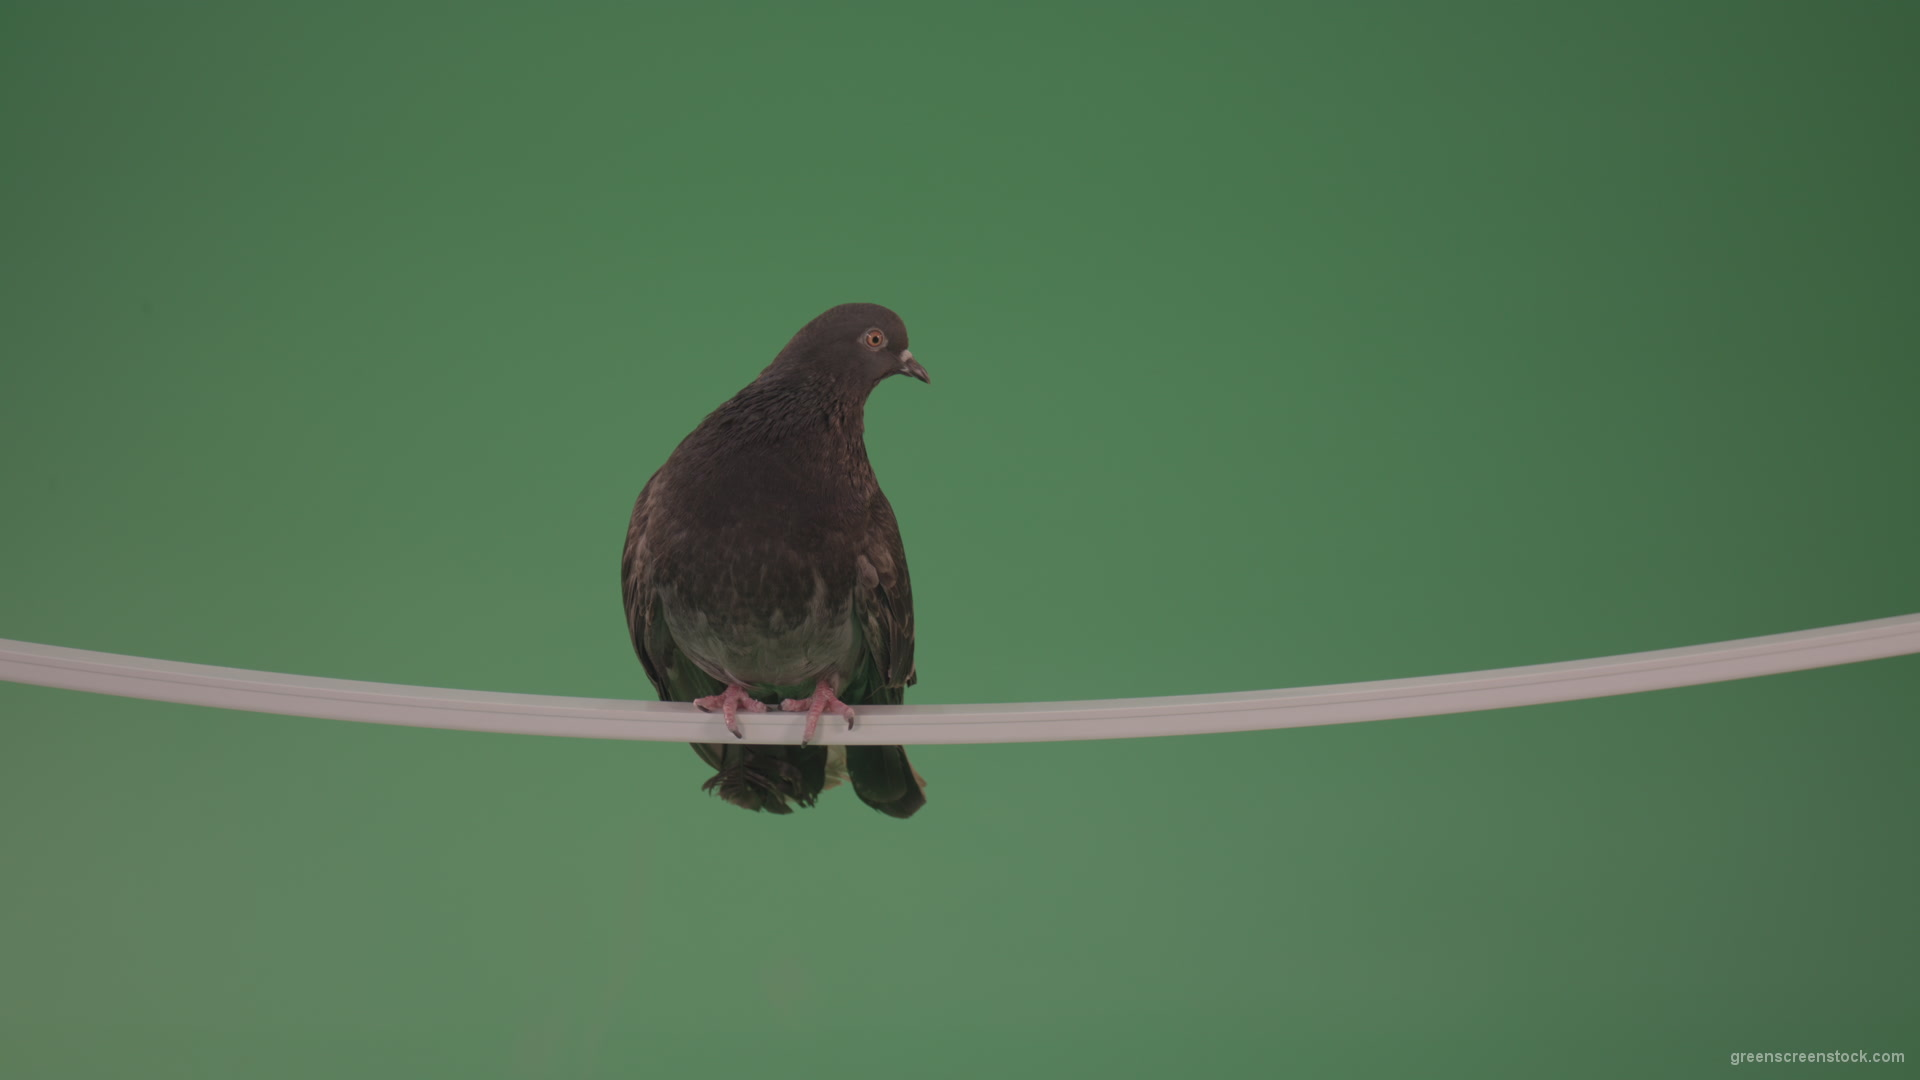 Sitting-bird-doves-on-a-pipe-in-a-big-city-isolated-on-chromakey-background_002 Green Screen Stock